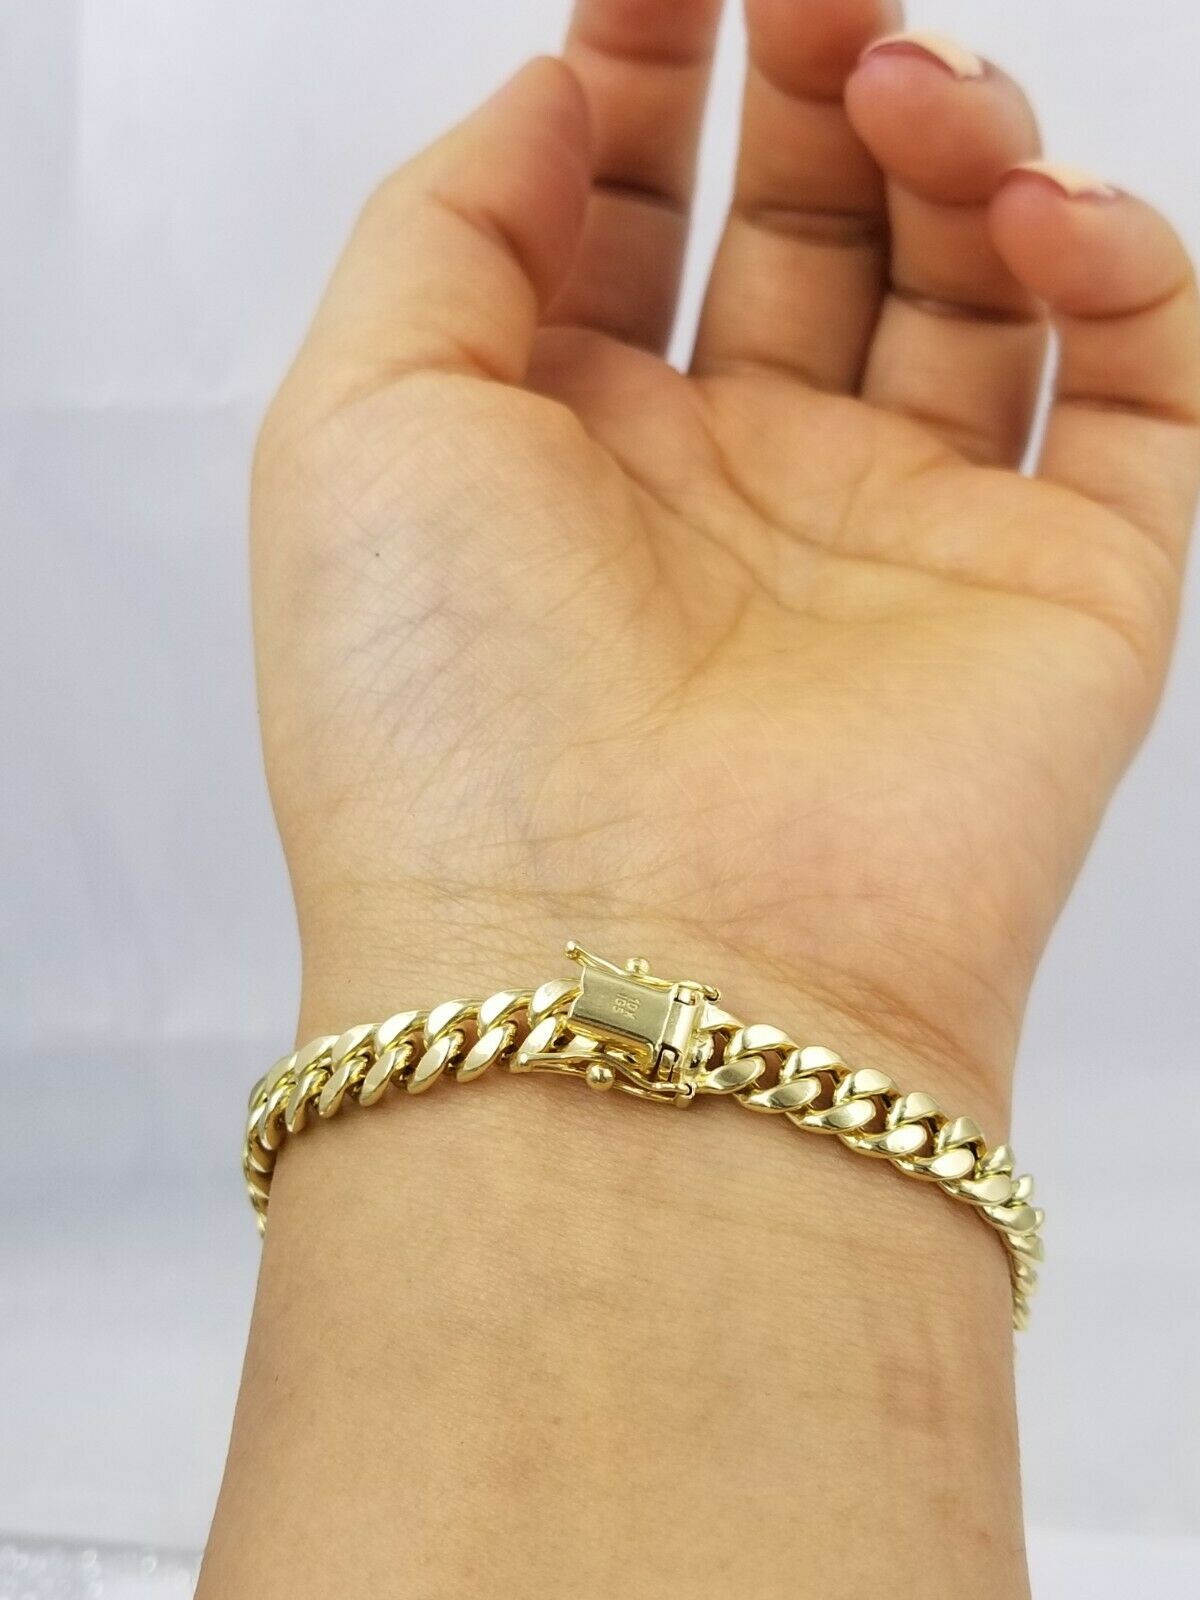 REAL 10k Gold Ladies Miami Cuban Bracelet 7.5" 6mm 10kt Yellow Gold Strong Link